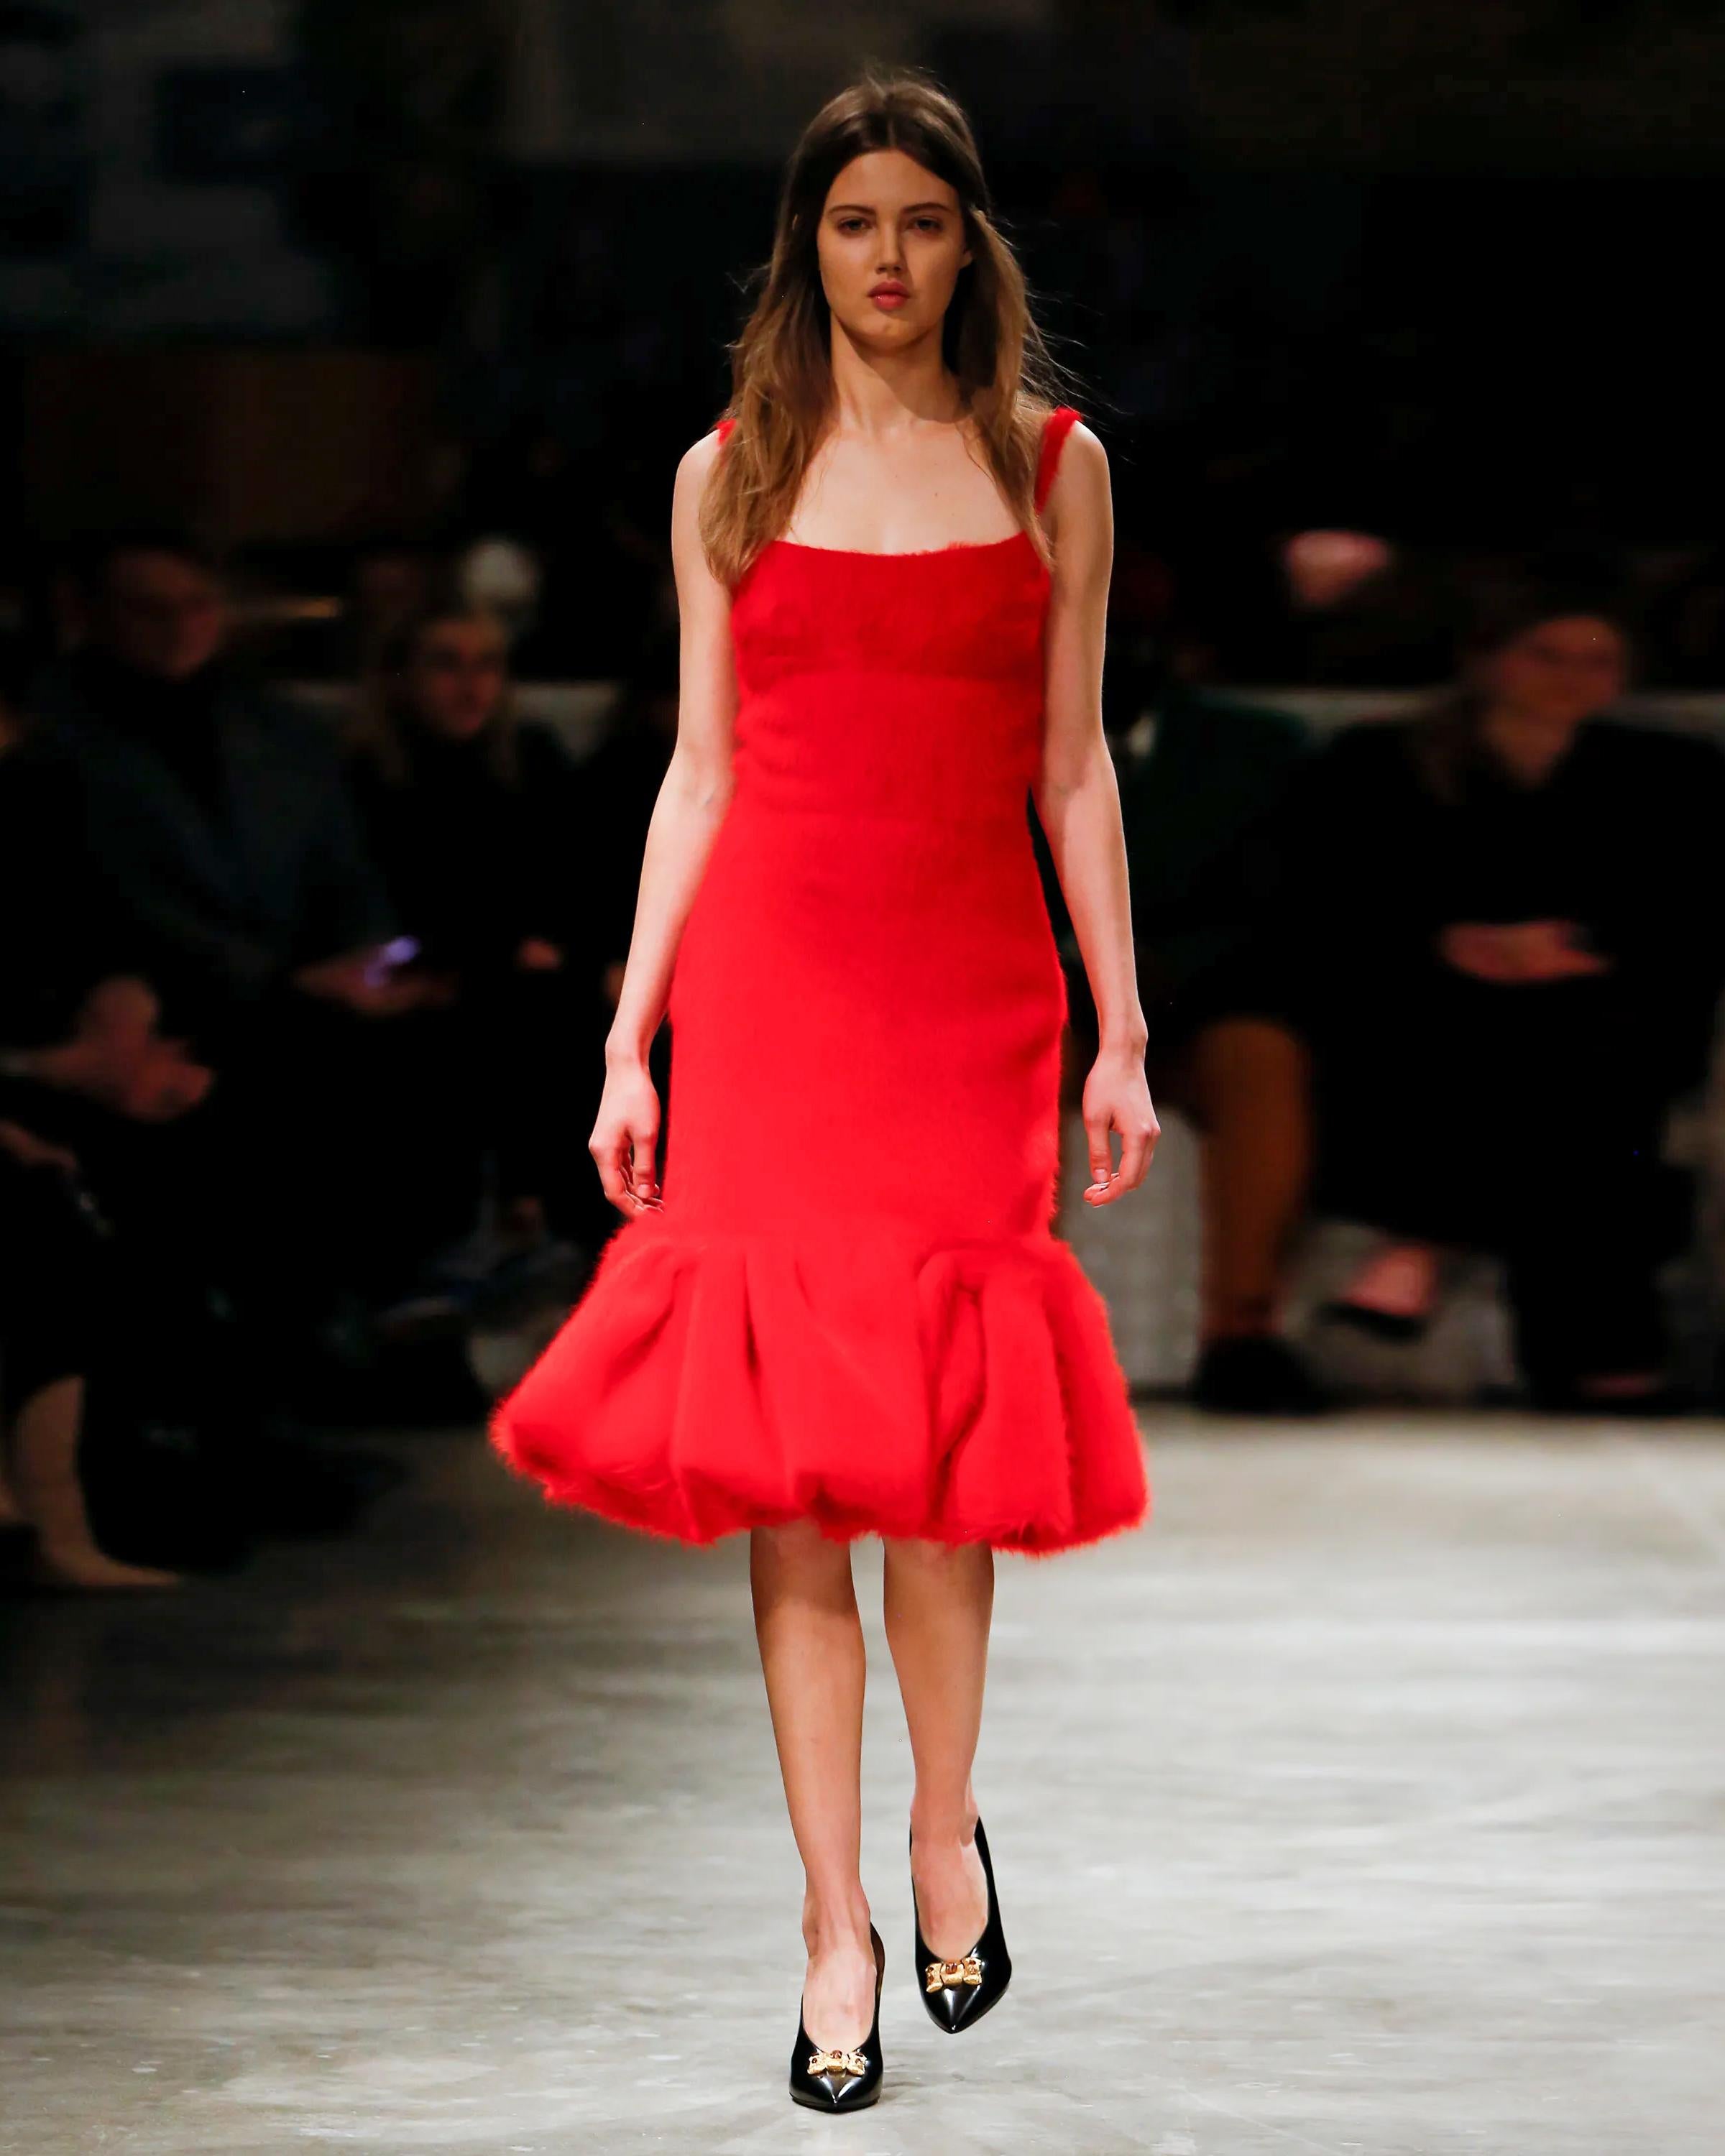 ▪ Runway Prada Red Cocktail Dress
▪ Creative Director: Miuccia Prada
▪ Fall-Winter 2017
▪ Sold by One of a Kind Archive
▪ Crafted from plush red brushed alpaca silk, boasting a luxuriously fuzzy texture
▪ Tailored bodice features a classic square